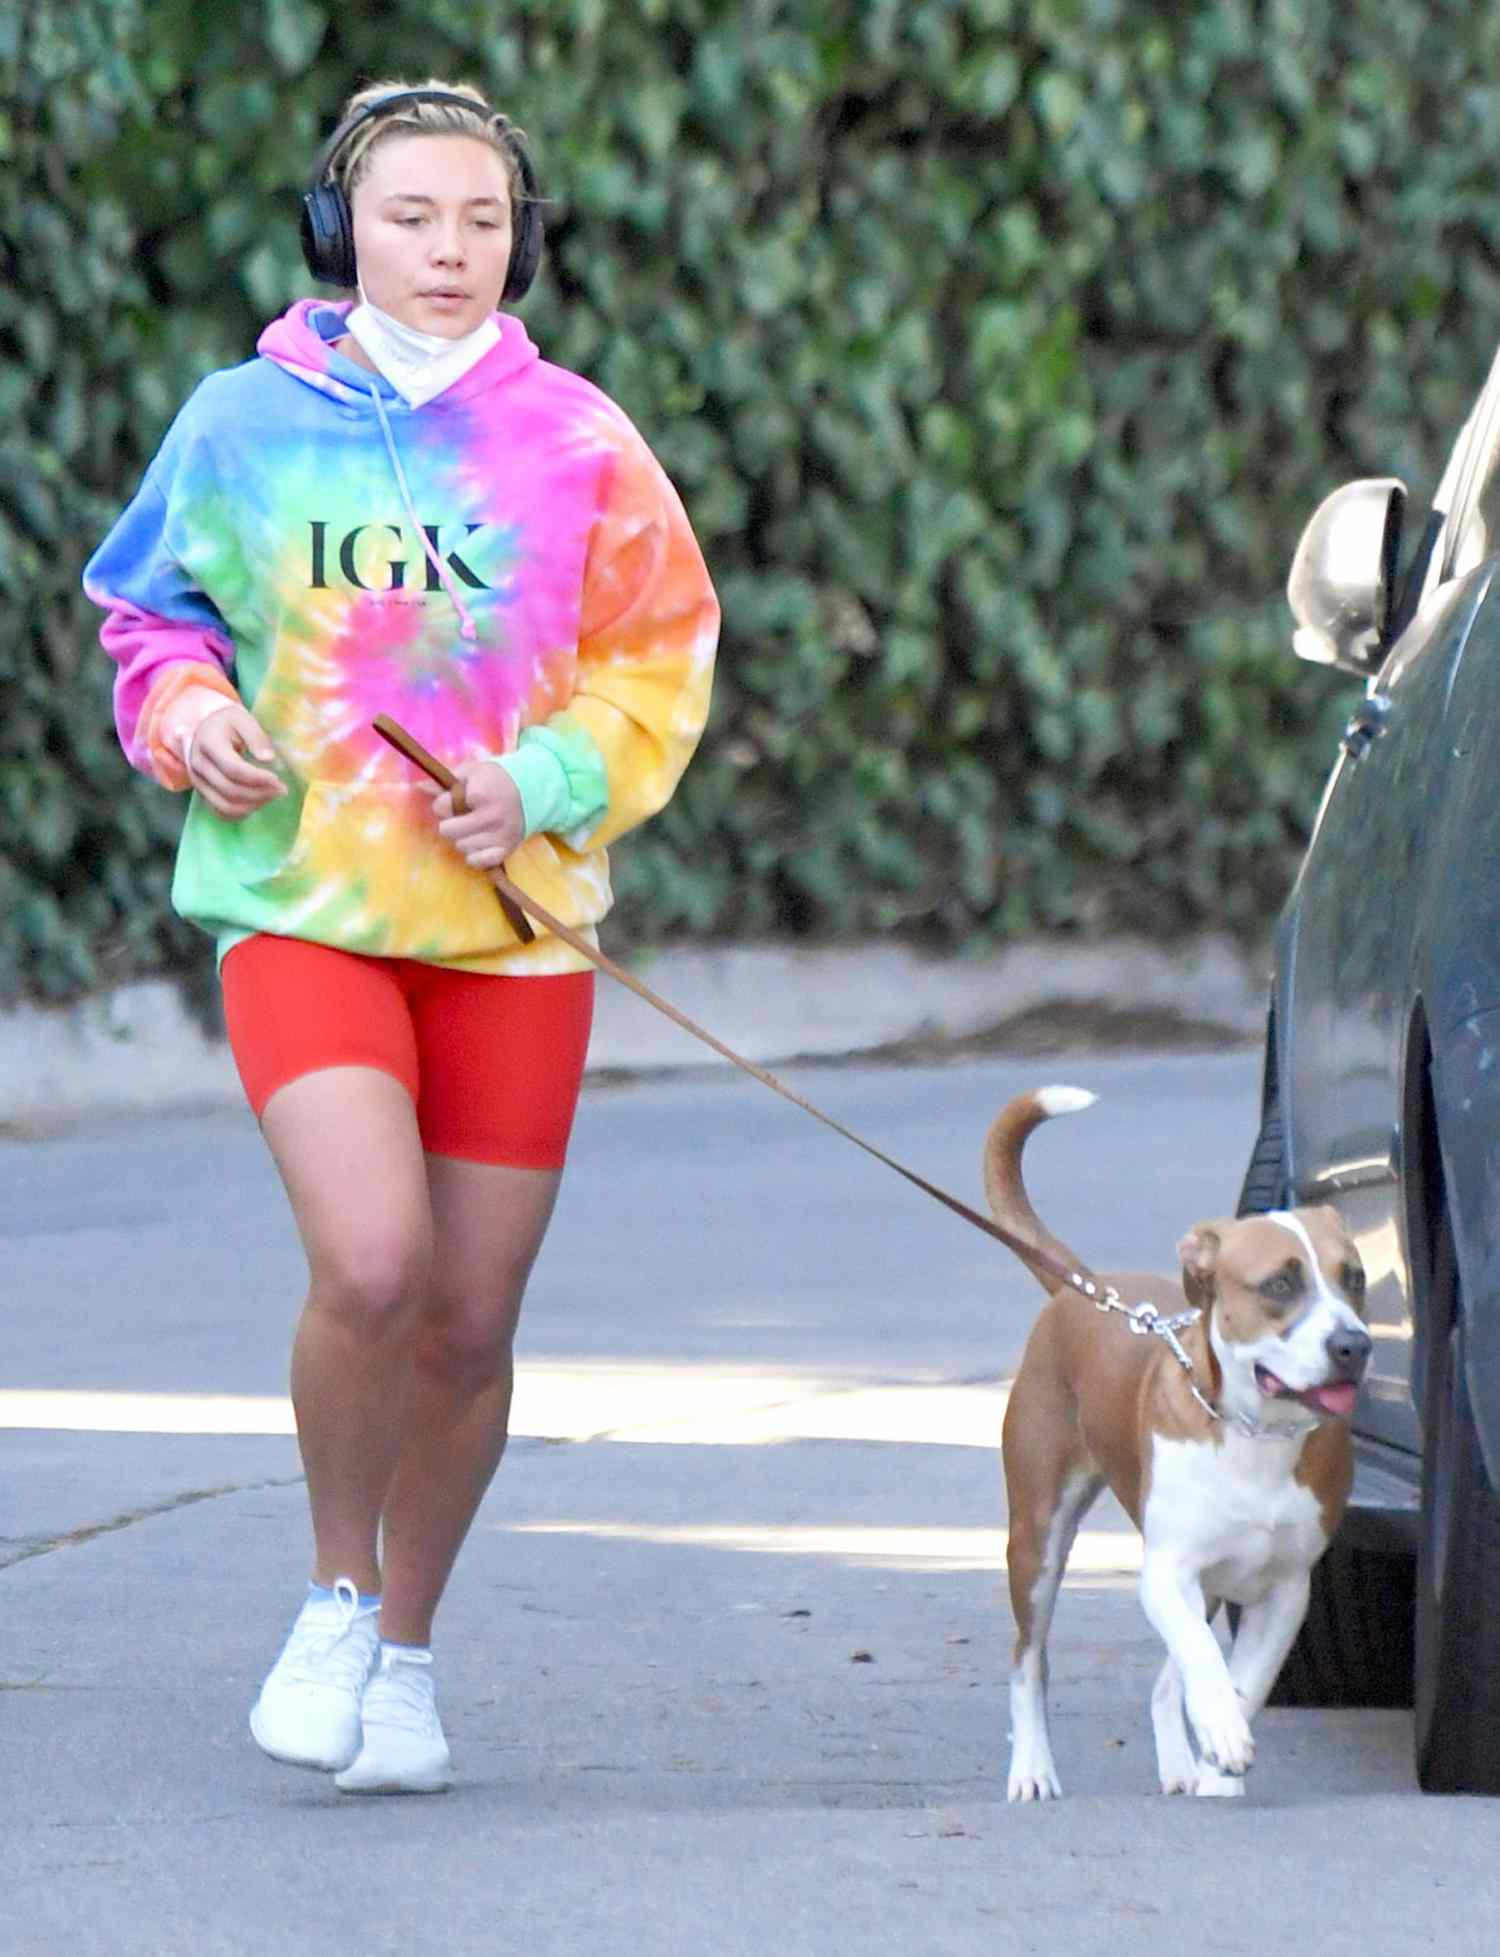 Florence Pugh Takes A Jog In A Colorful Hoodie As Romance Between Her "Don't Worry Darling" Co-Stars Heats Up